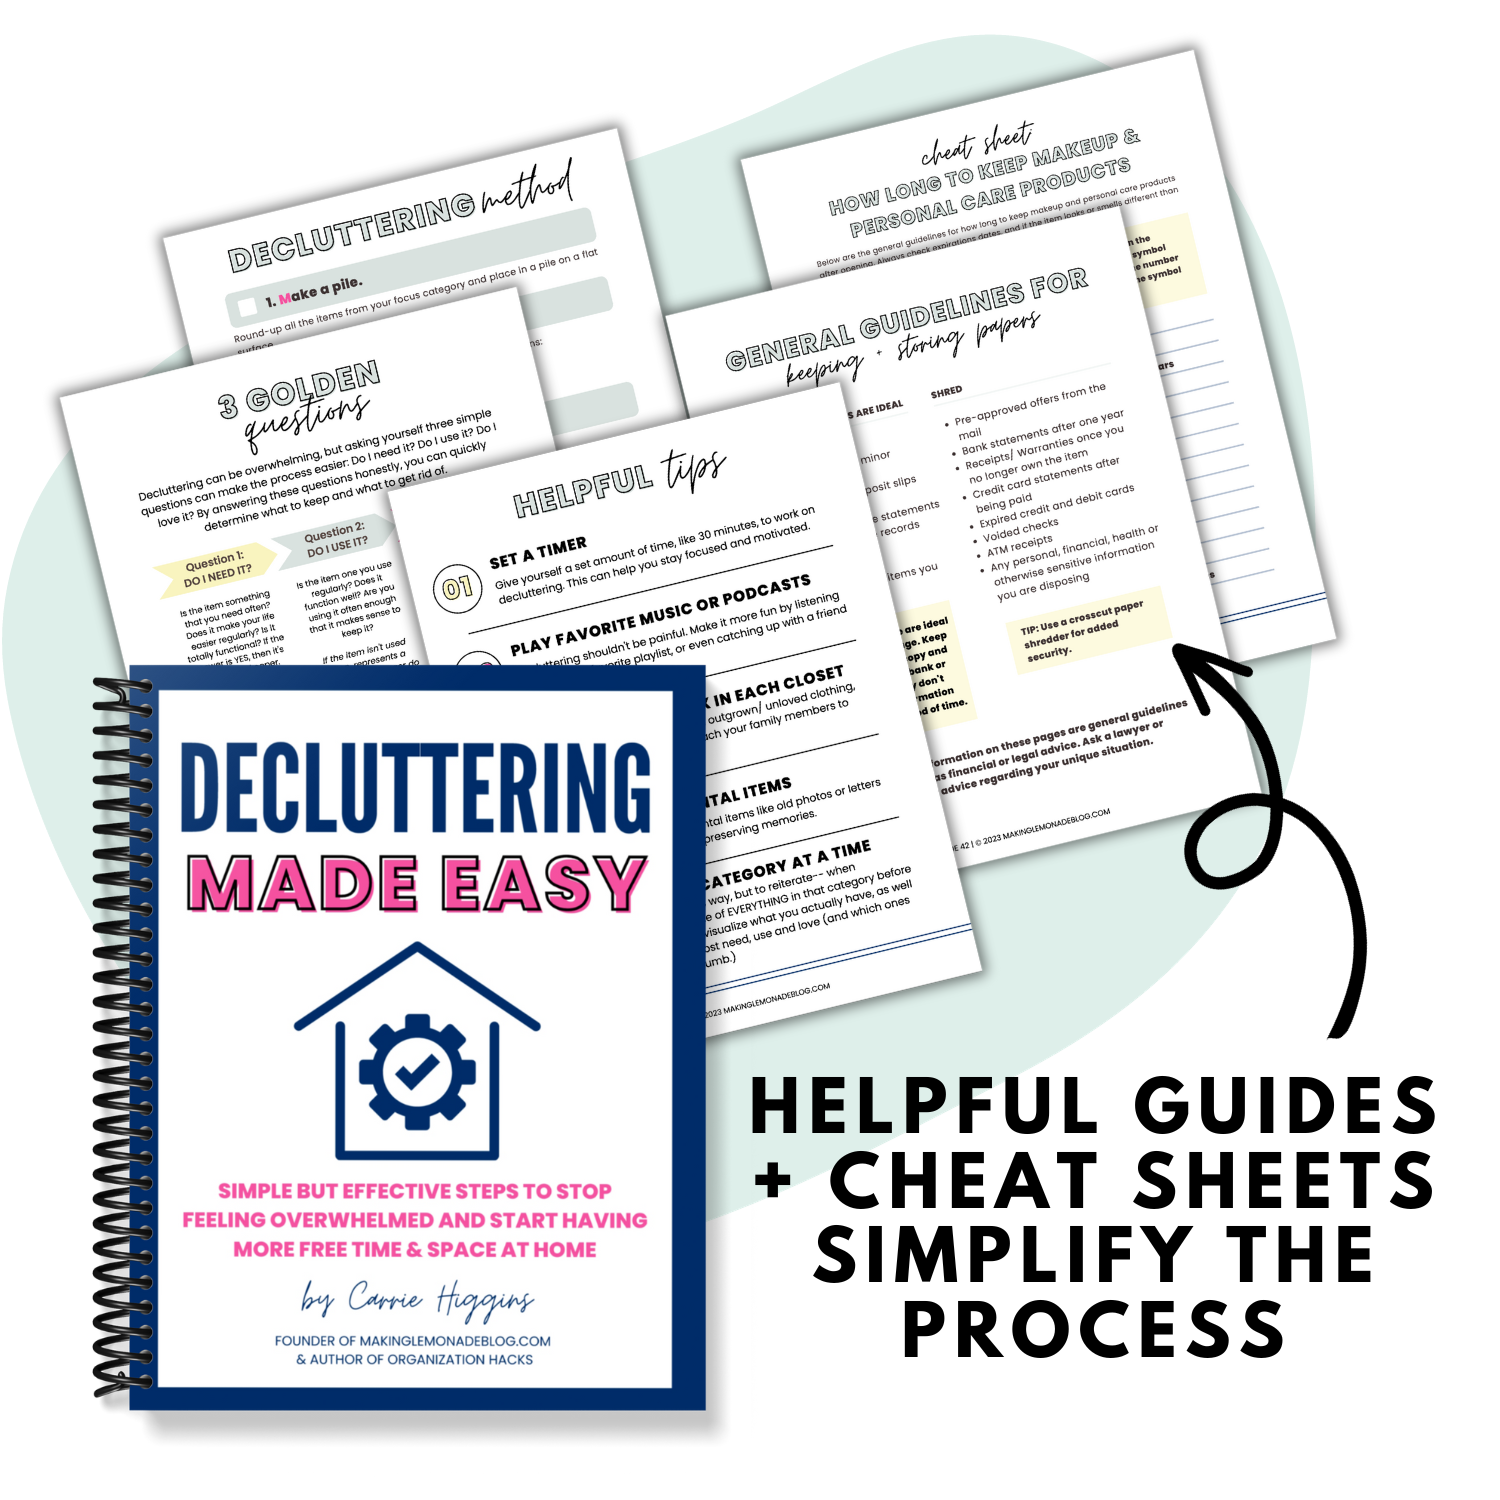 contents of guides inside the digital decluttering made easy workbook.